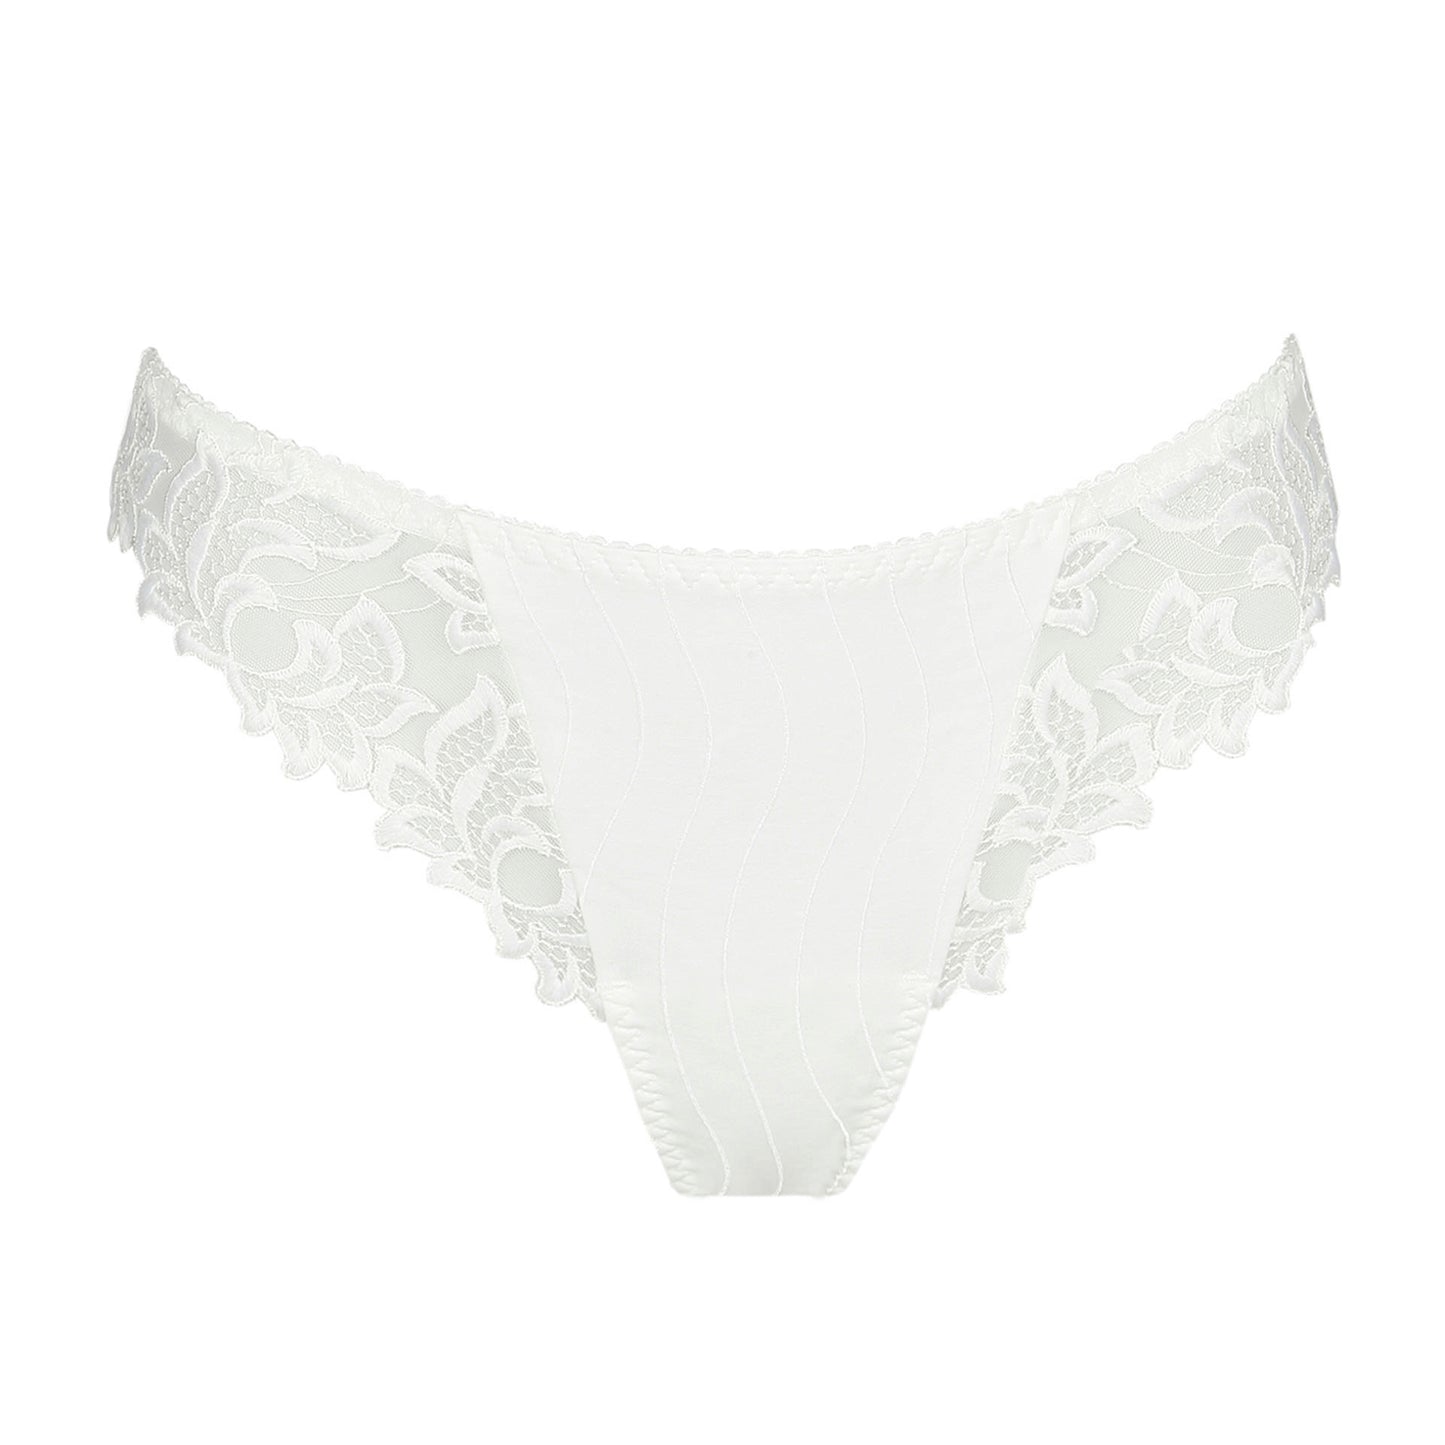 PrimaDonna Deauville Thong Natural